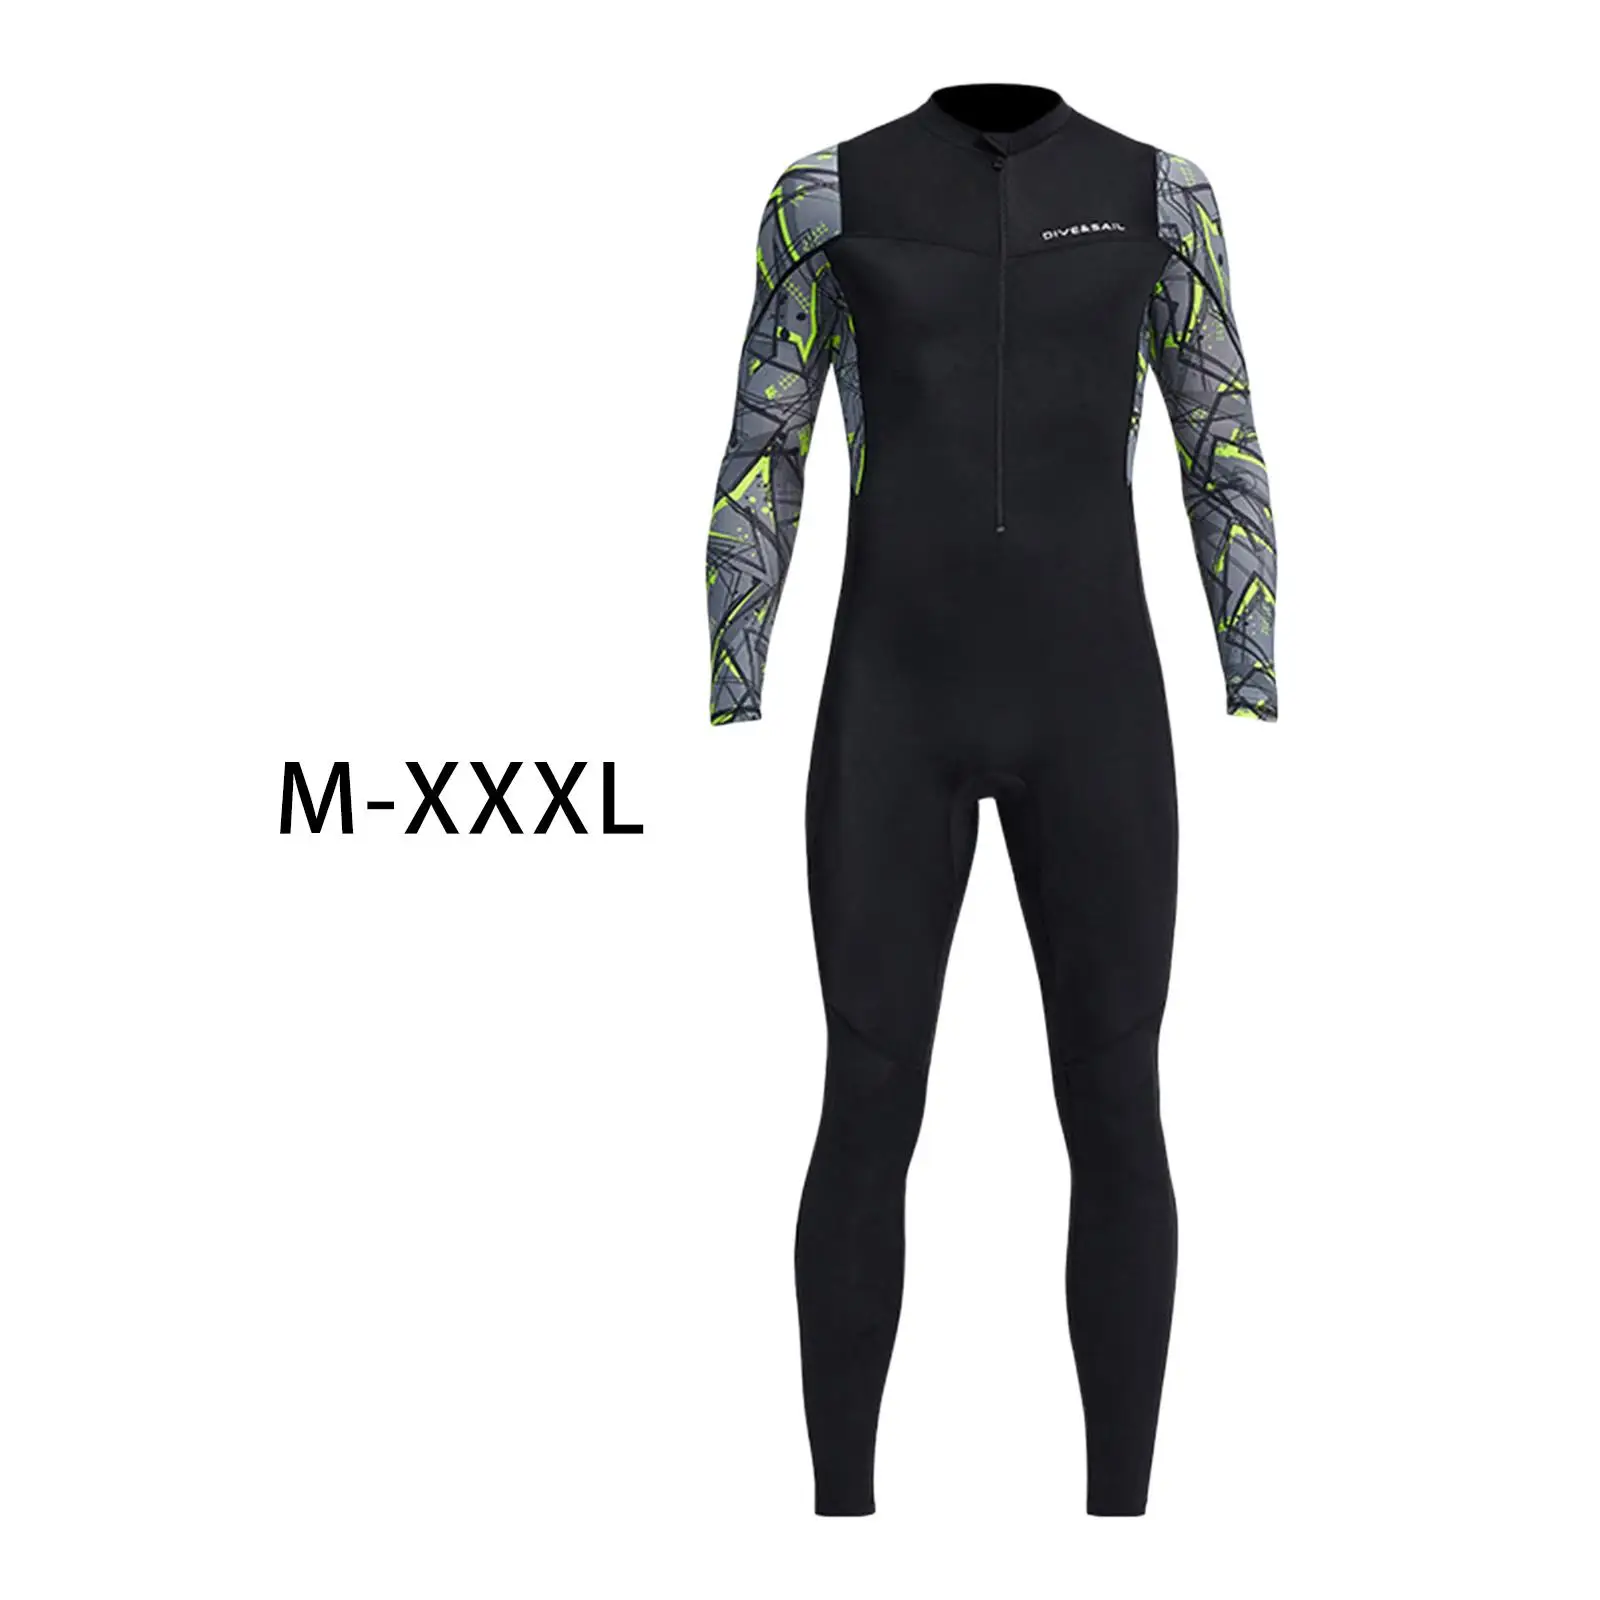 Mens Neoprene Wetsuit, Full Body Diving Suit Front Zip Wetsuit for Diving Snorkeling Surfing Swimming